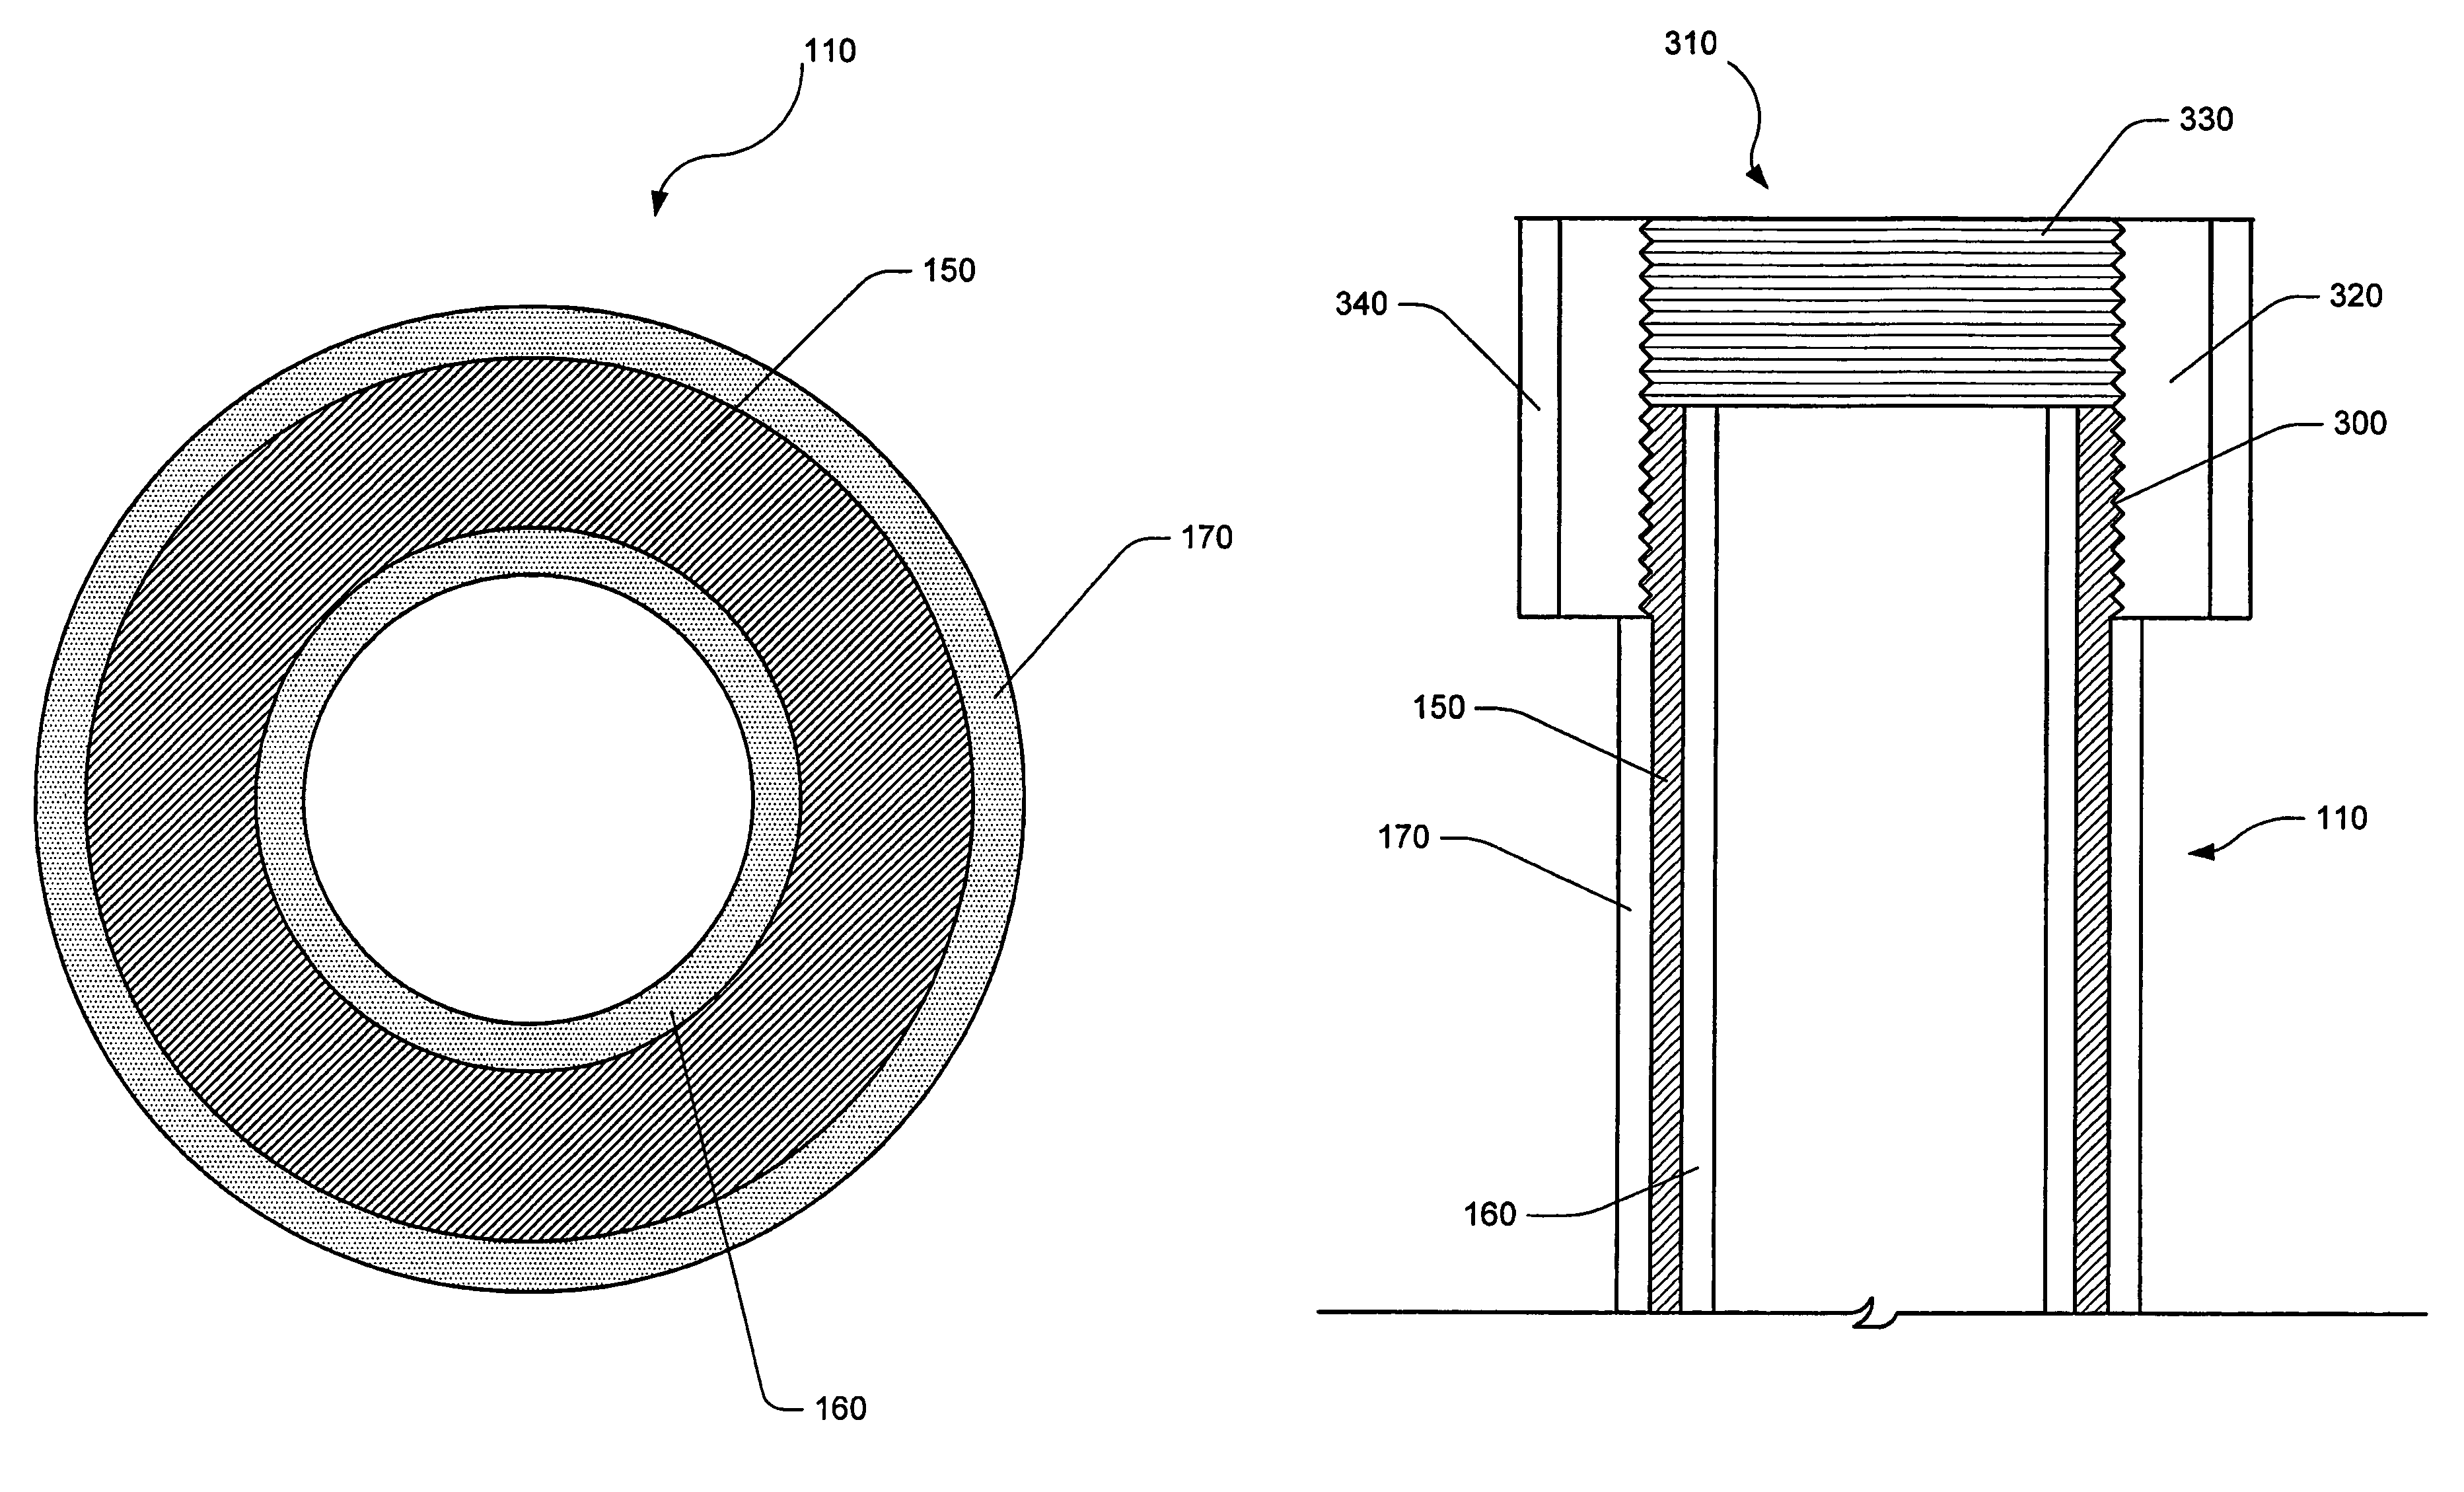 Casing comprising stress-absorbing materials and associated methods of use